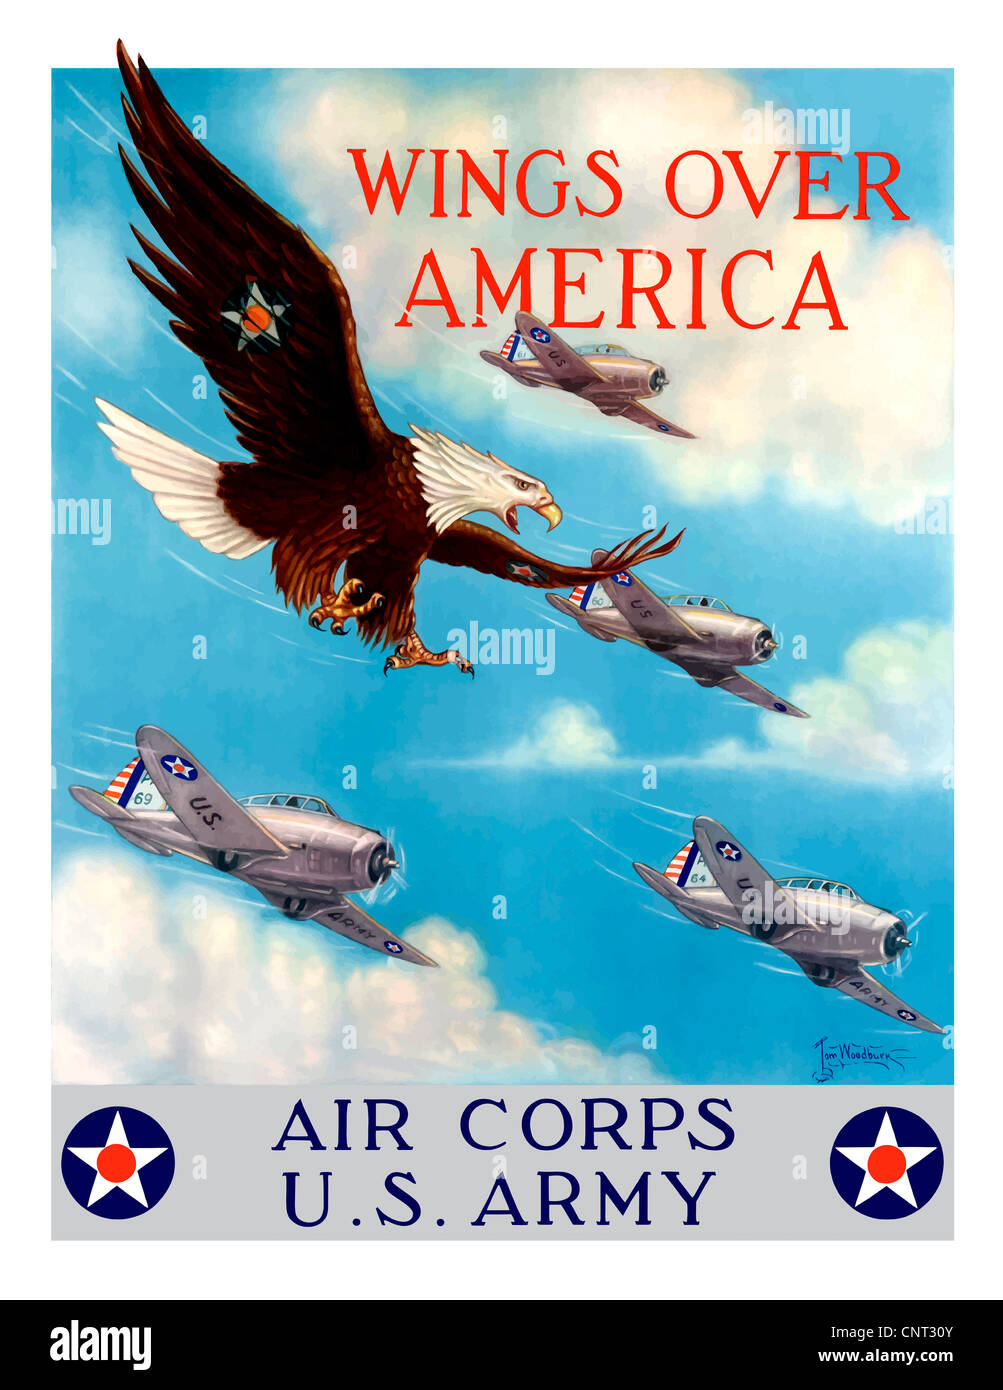 Vintage World War II poster of a bald eagle flying in the sky with fighter planes. Stock Photo